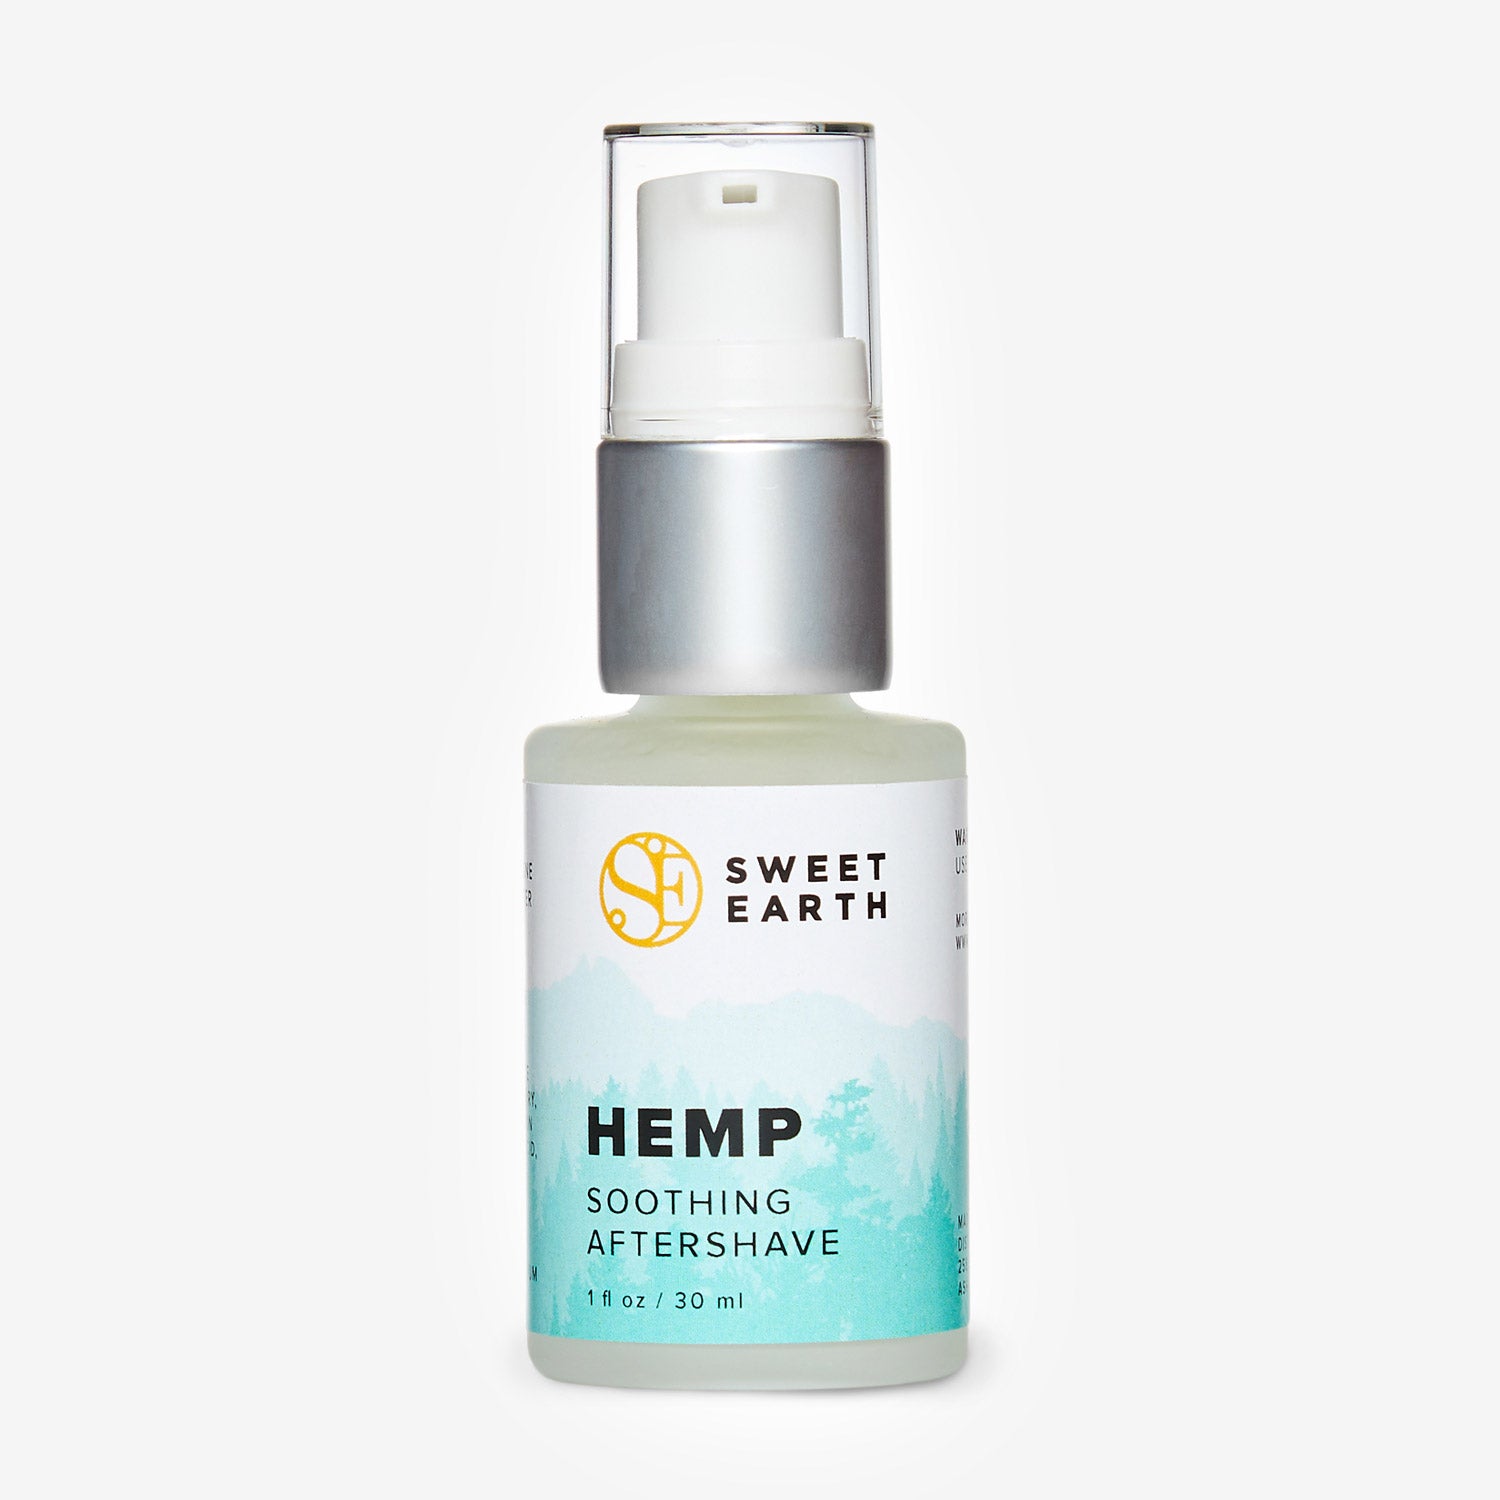 Hemp Soothing Aftershave